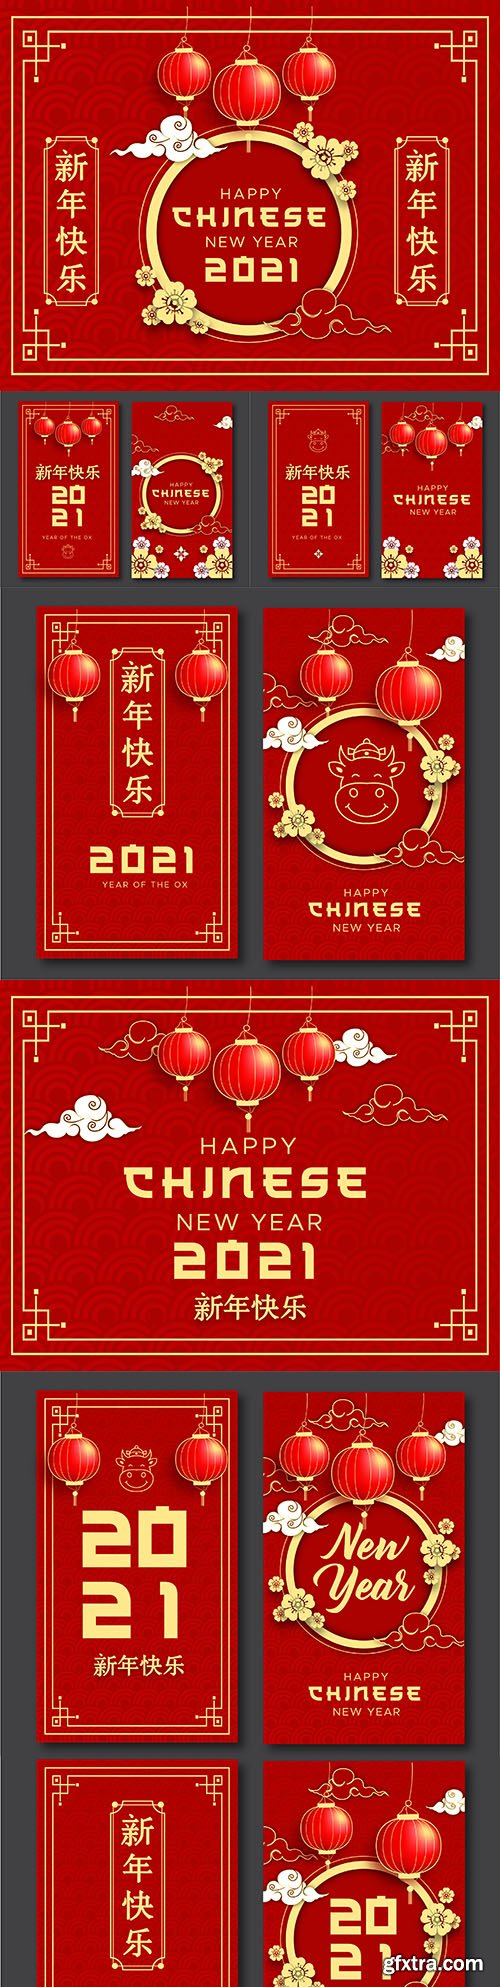 Greeting card for Chinese New Year flowers and flashlights